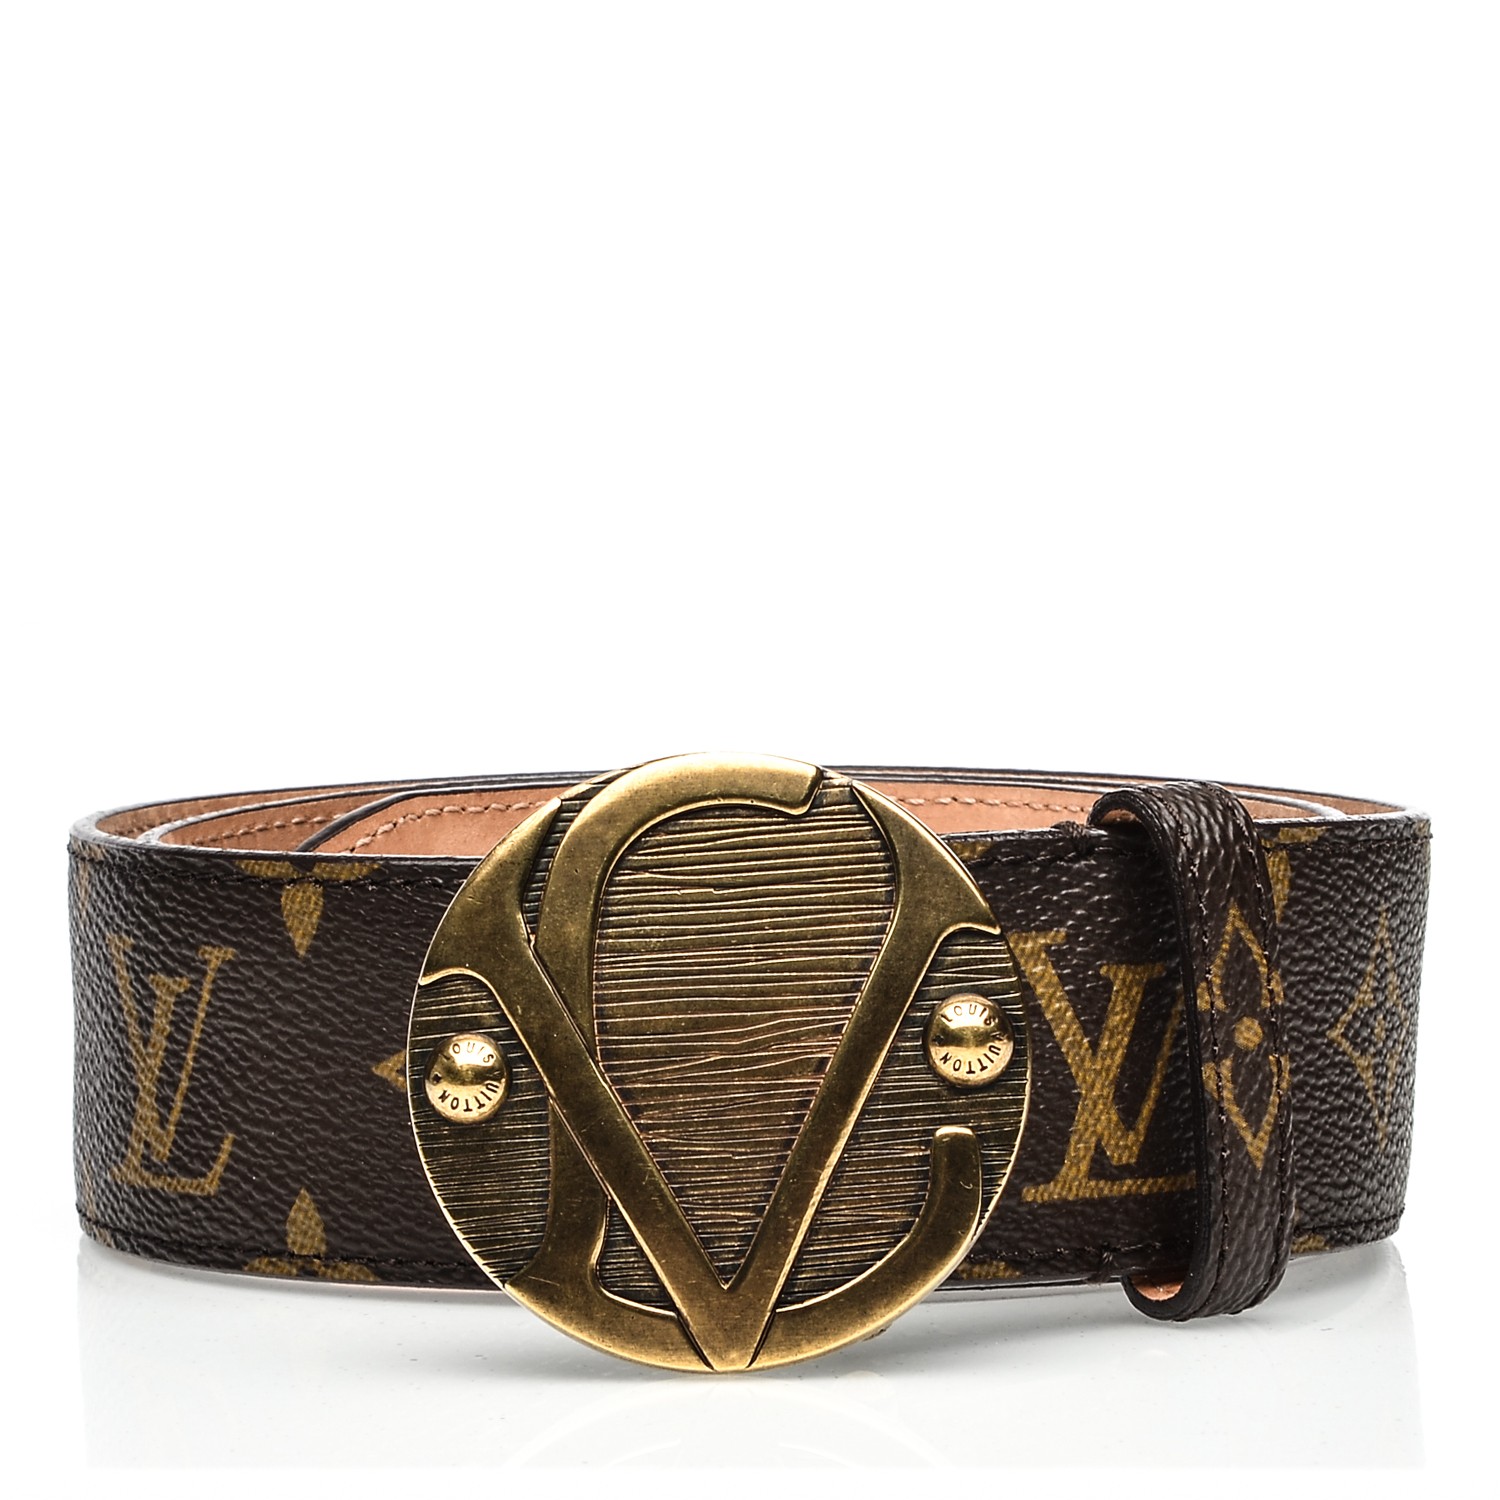 The History of Louis Vuitton belts